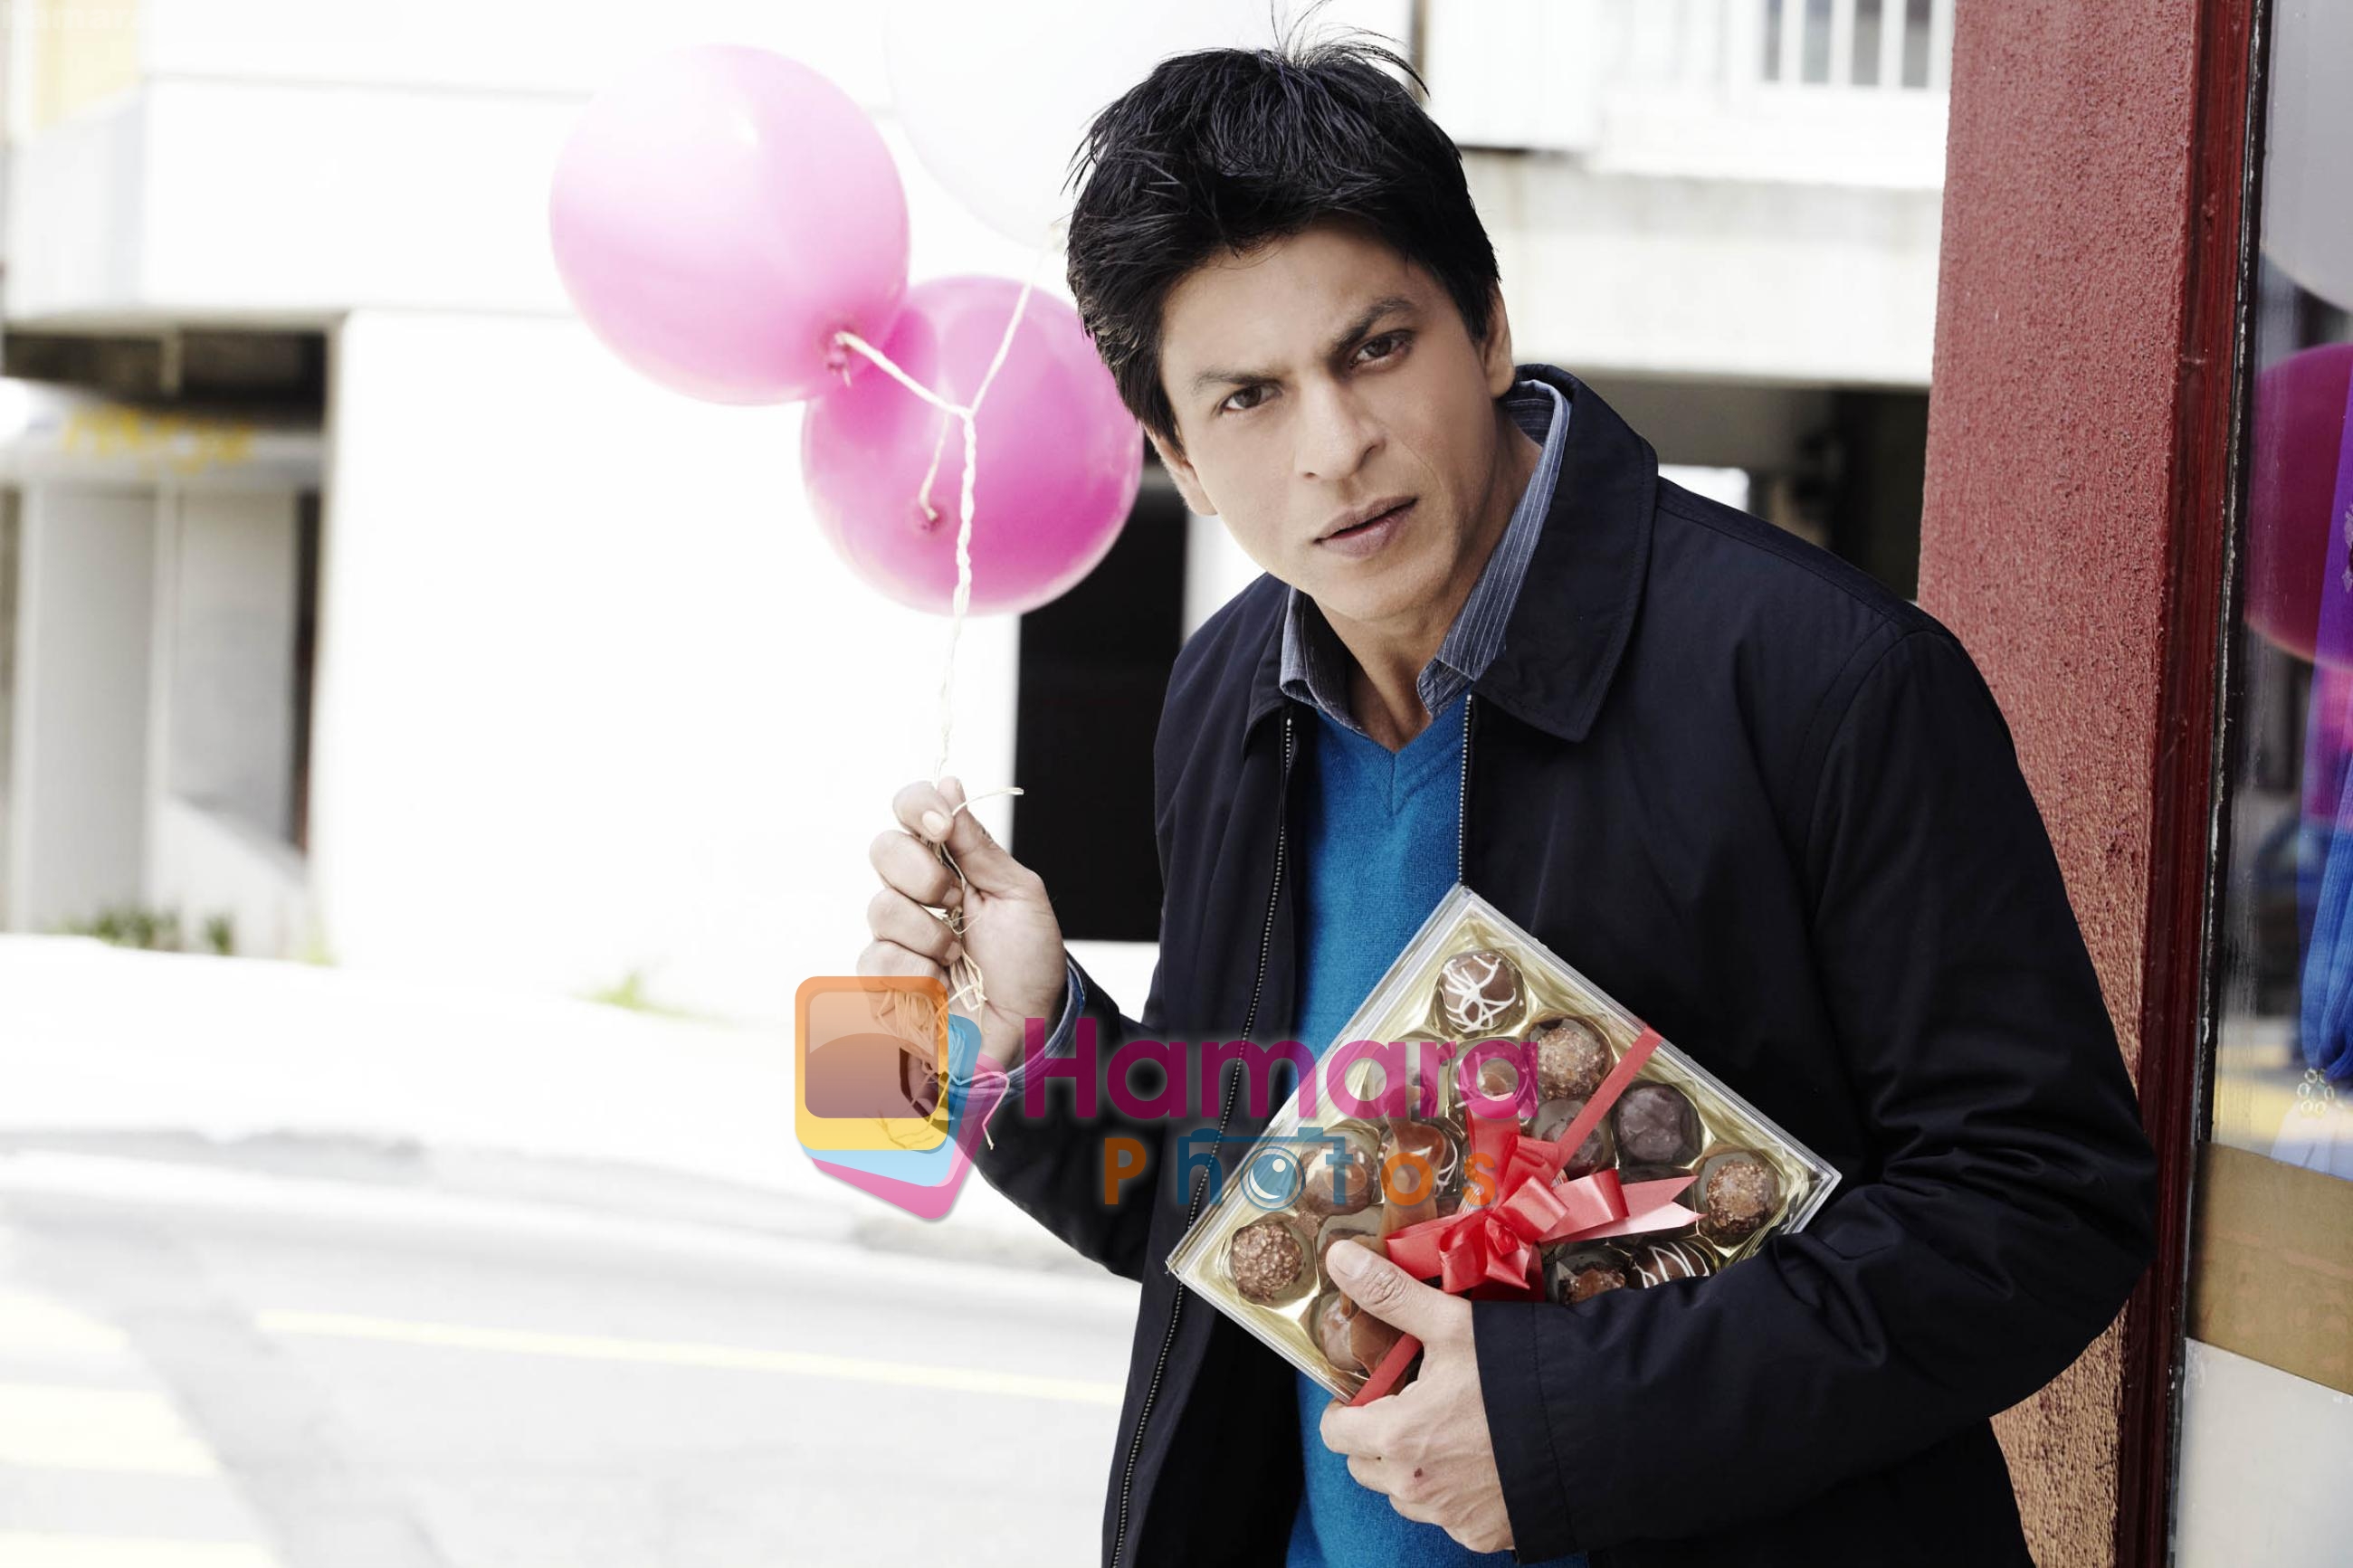 Shahrukh Khan in the still from movie My Name is Khan 